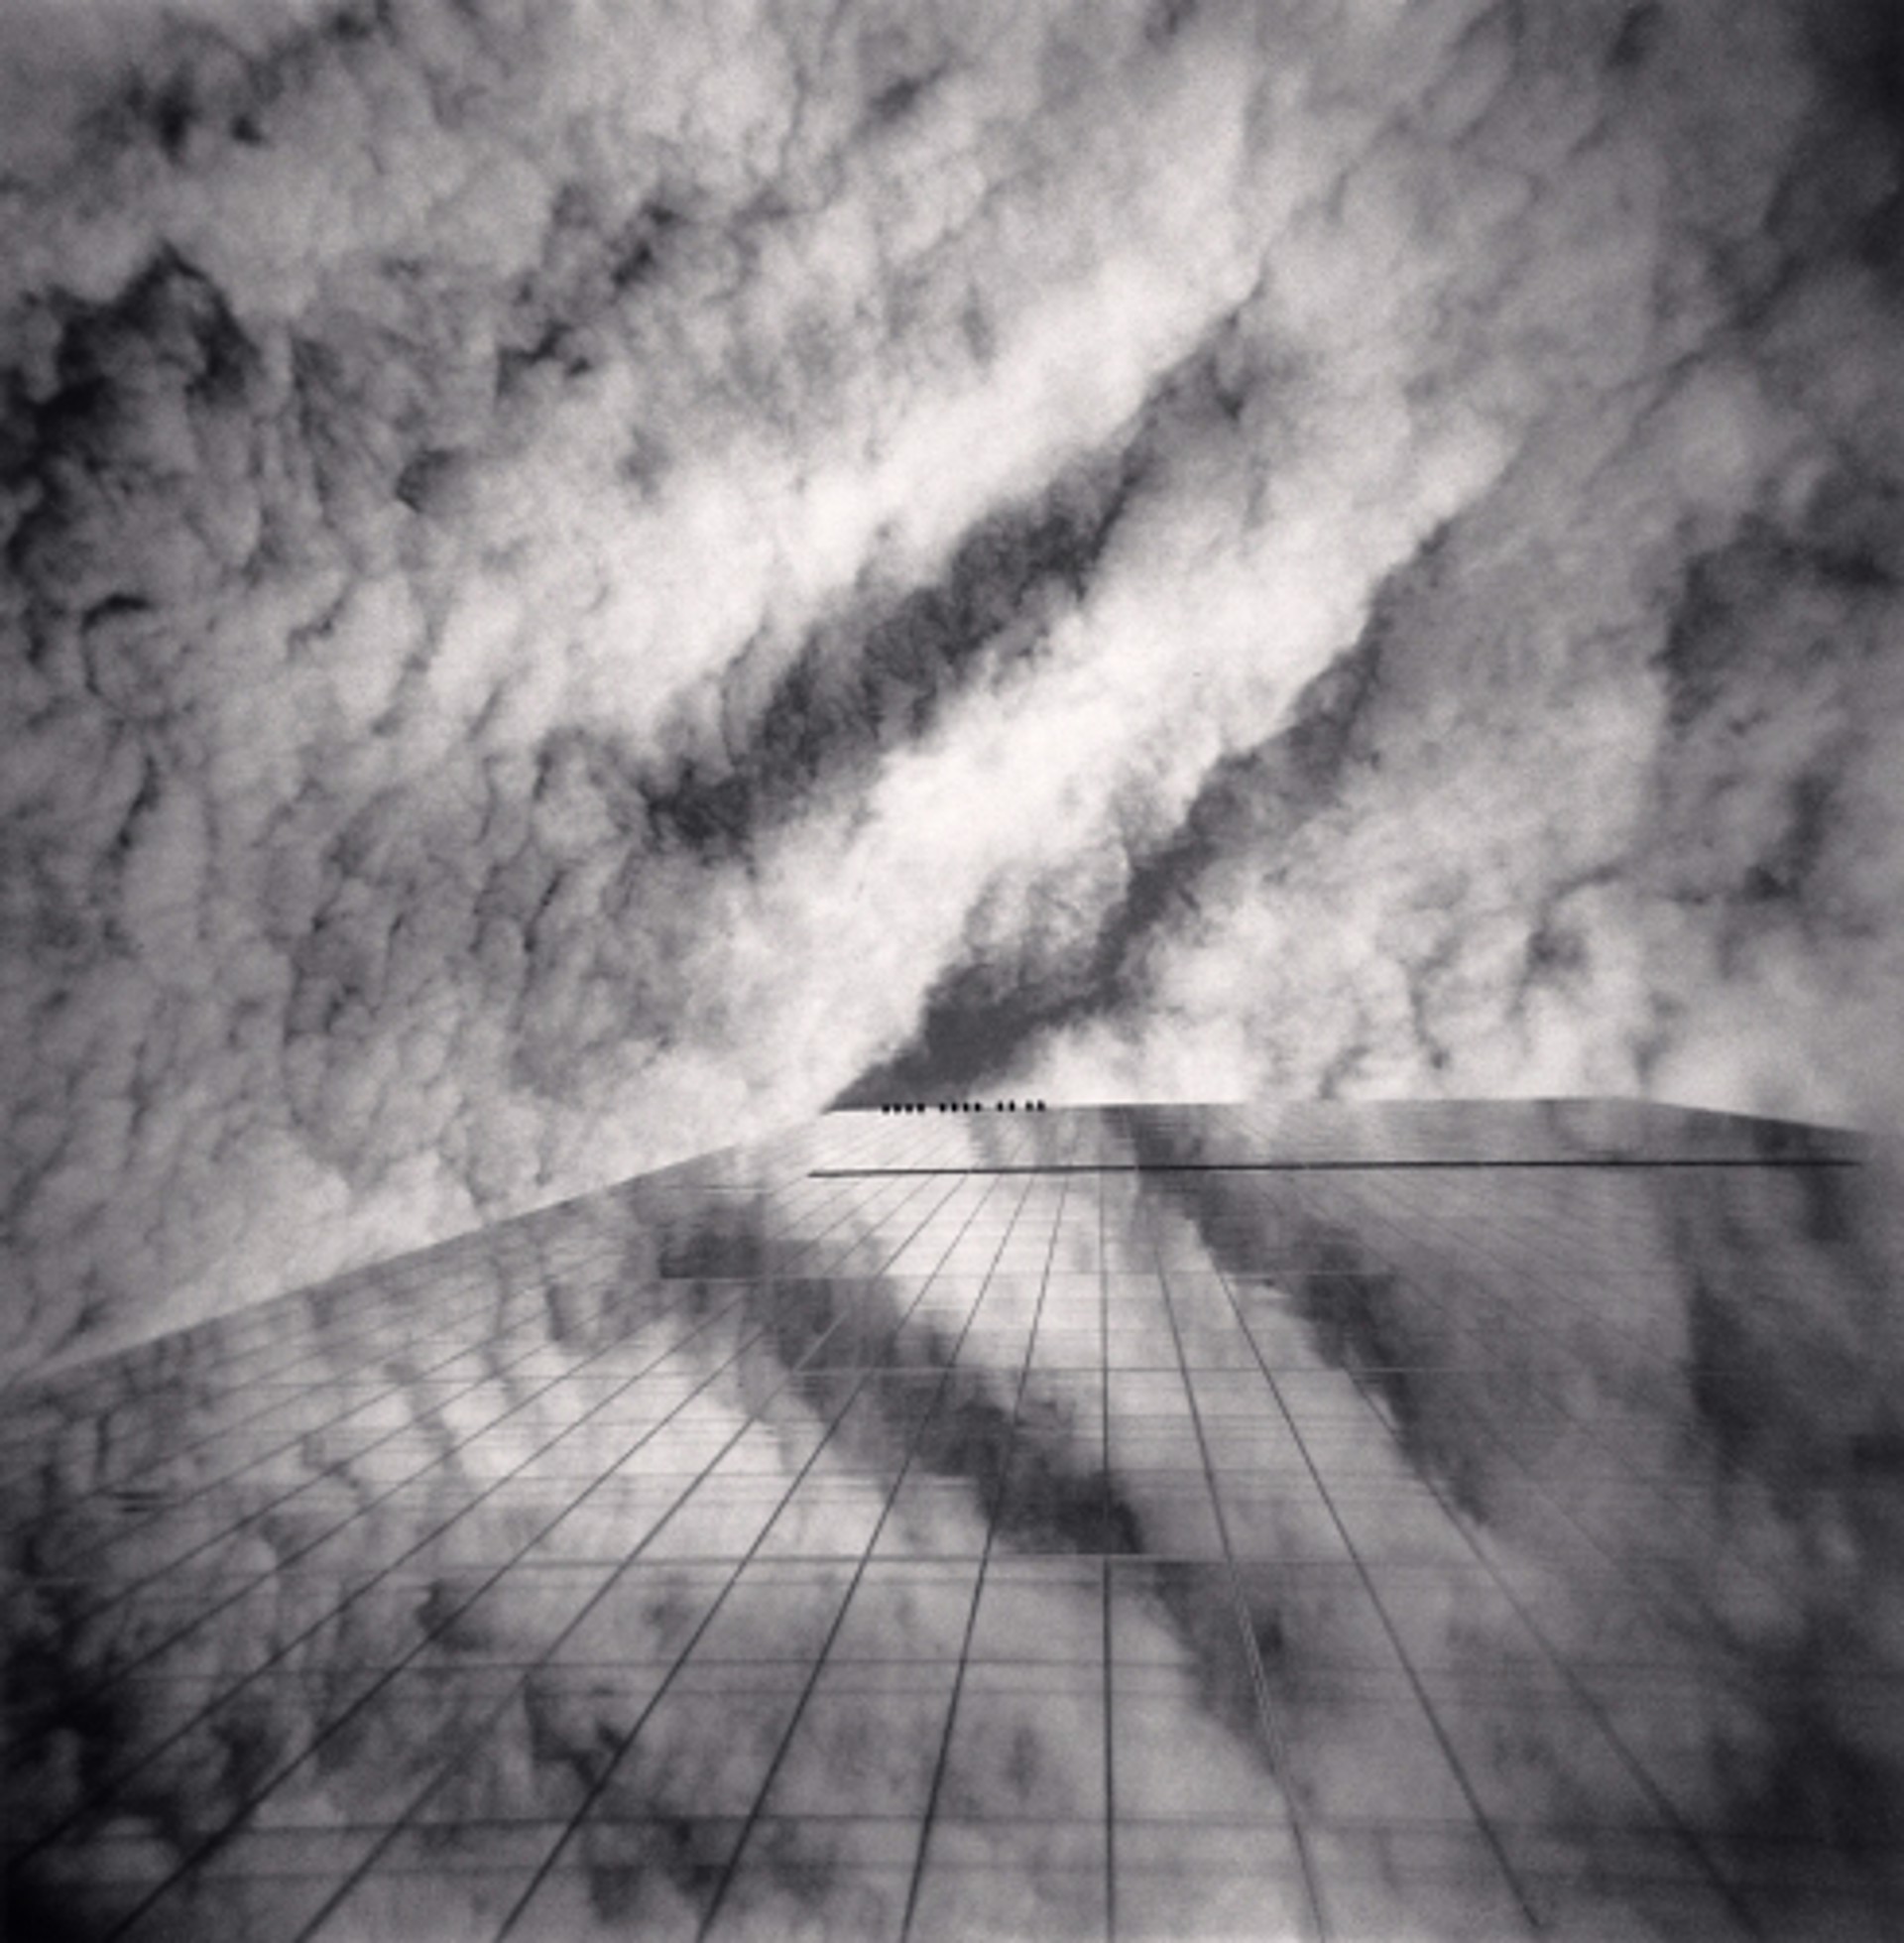 Skyscraper and Clouds, New York, New York (edition of 45) by Michael Kenna